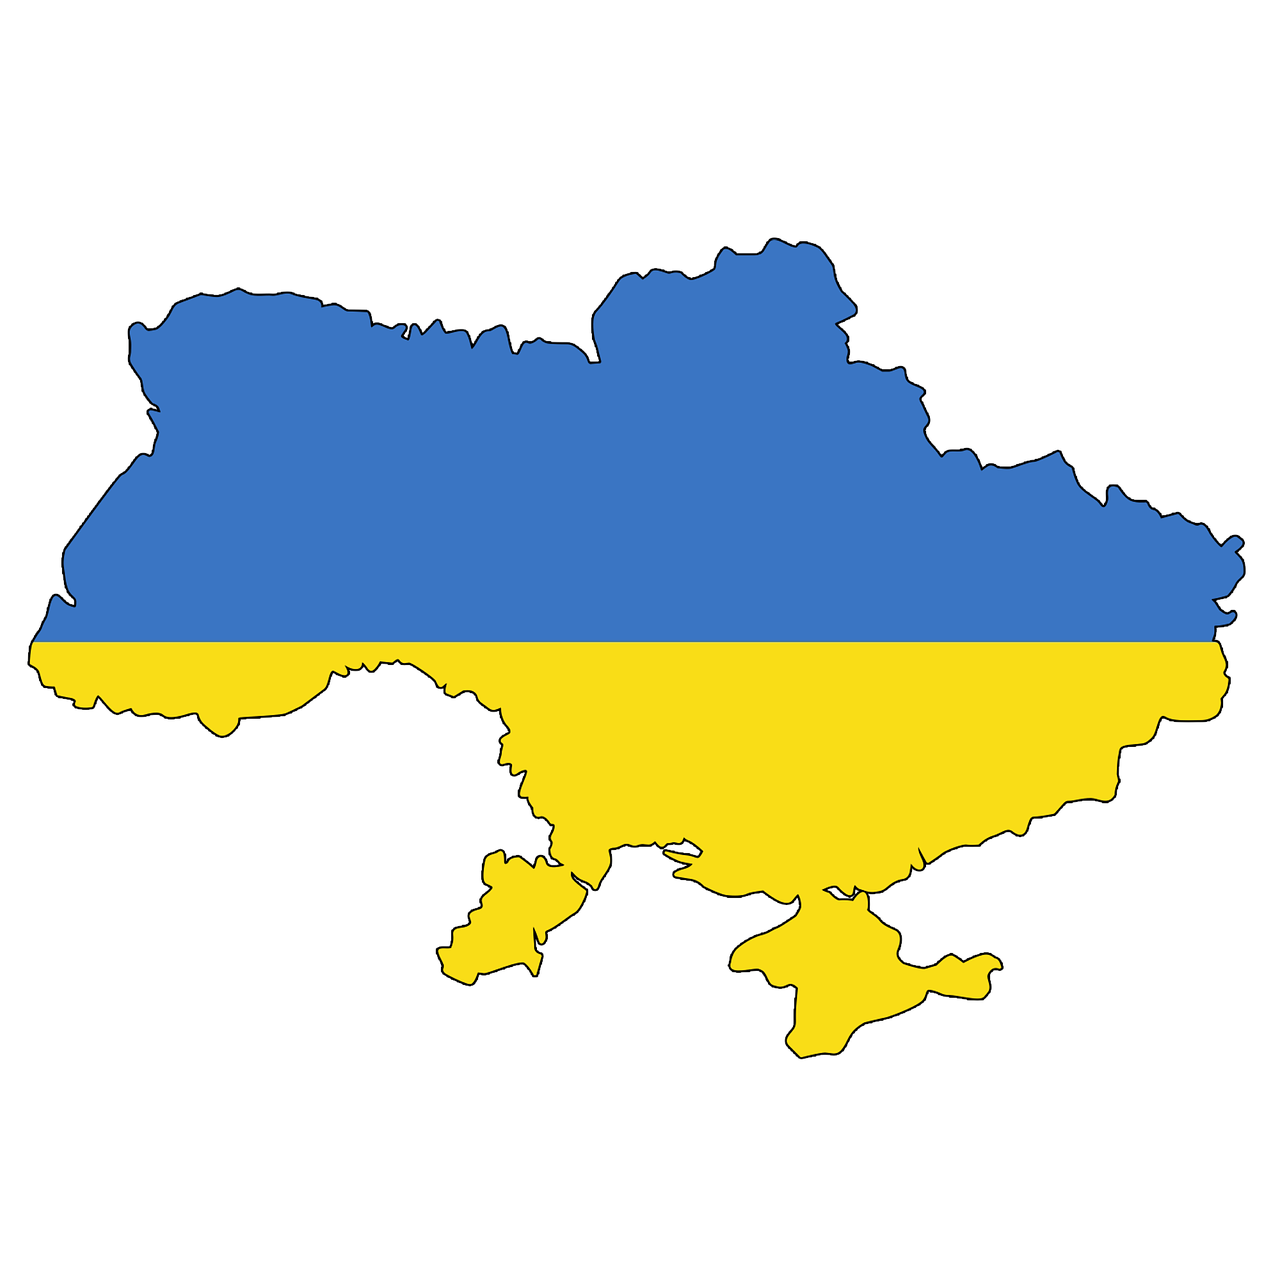 File:Flag map of Ukraine from 2014.png - Wikimedia Commons